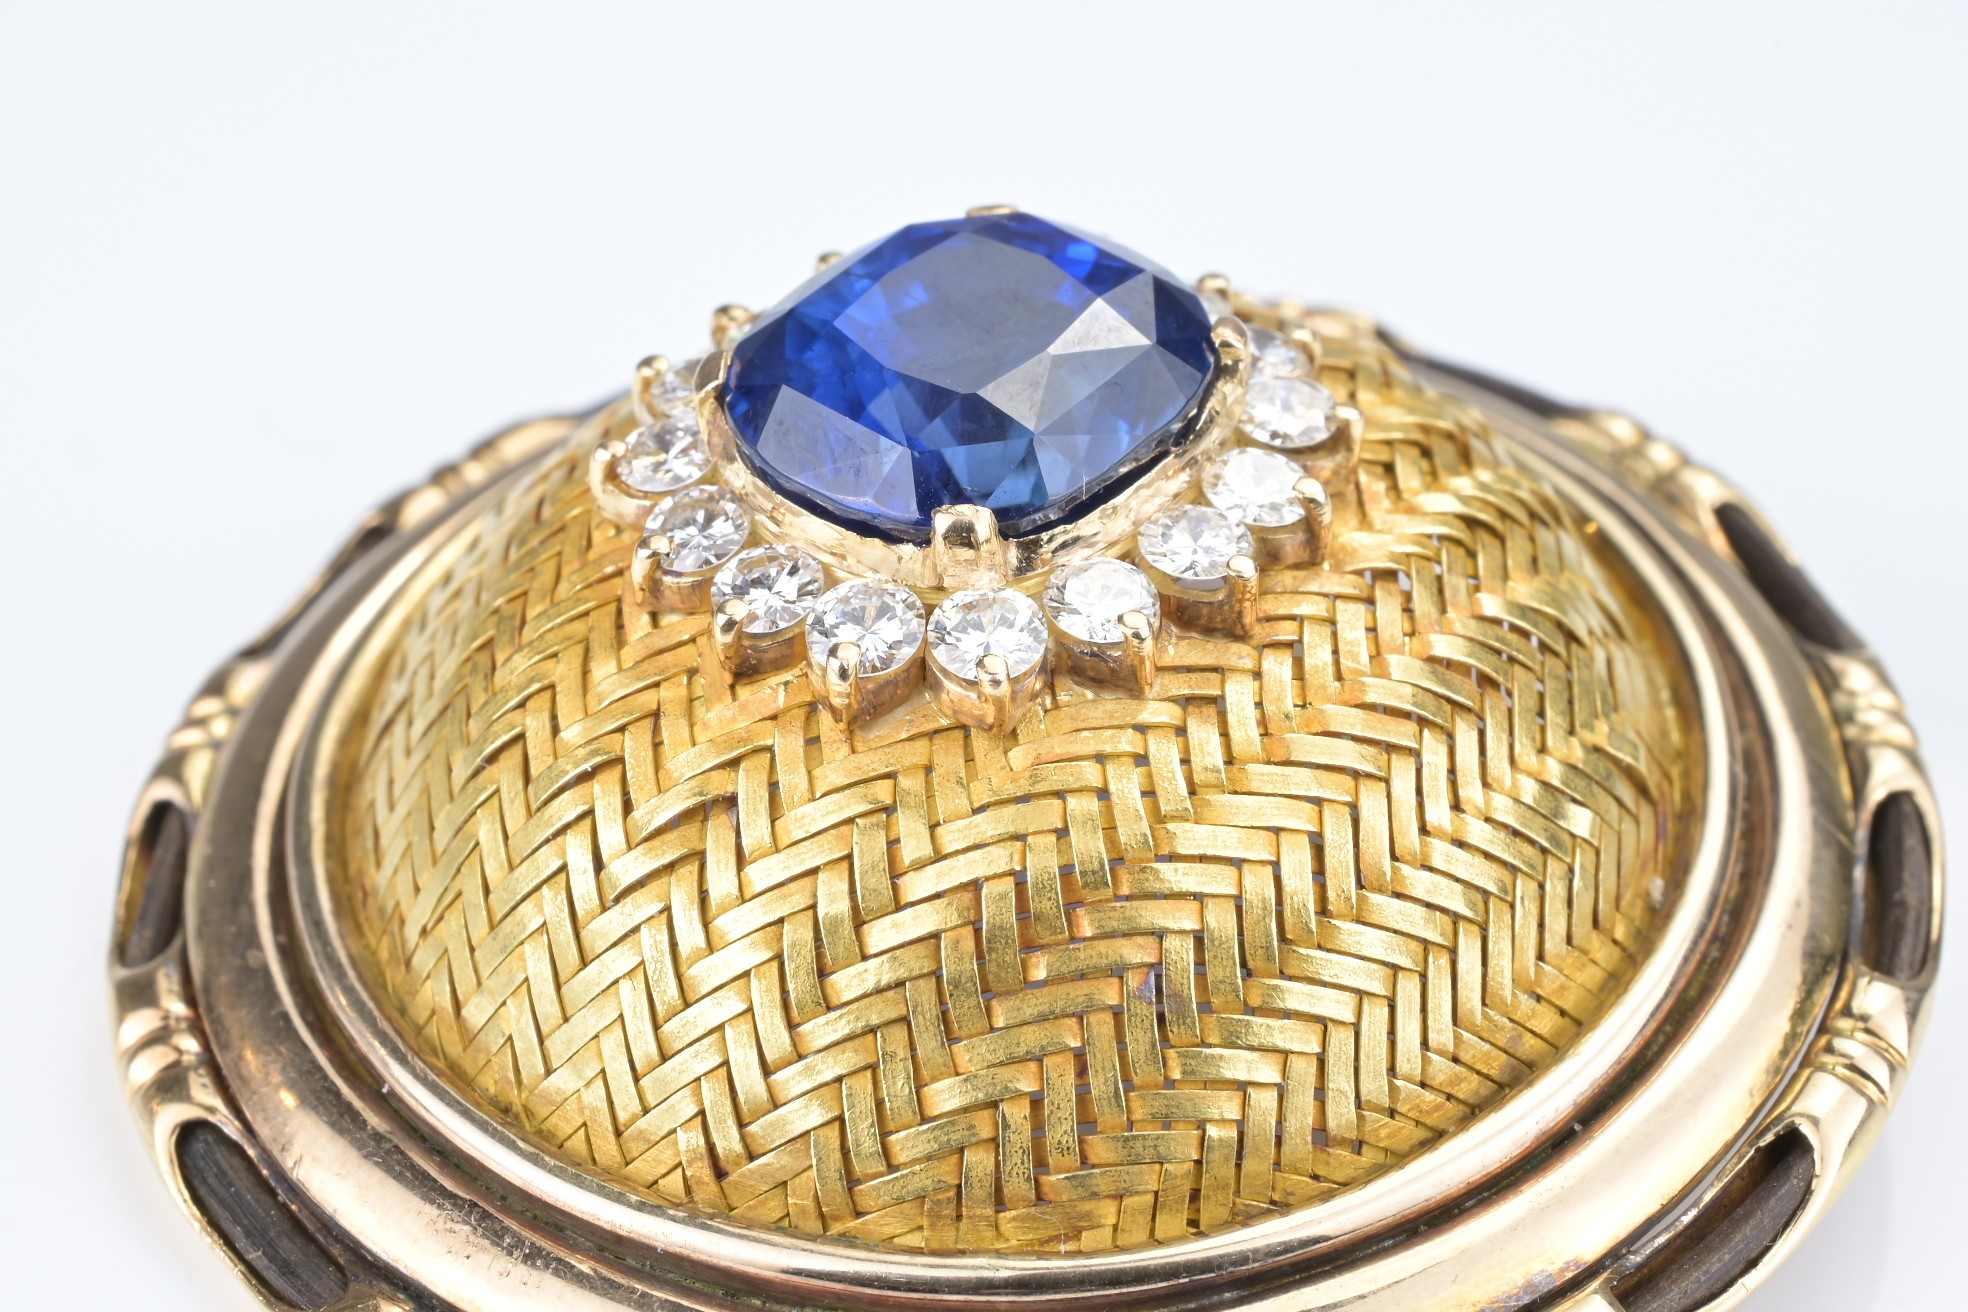 A 9.90CT BURMESE SAPPHIRE, DIAMOND AND GOLD PENDANT, WITH REPORT. - Image 6 of 9